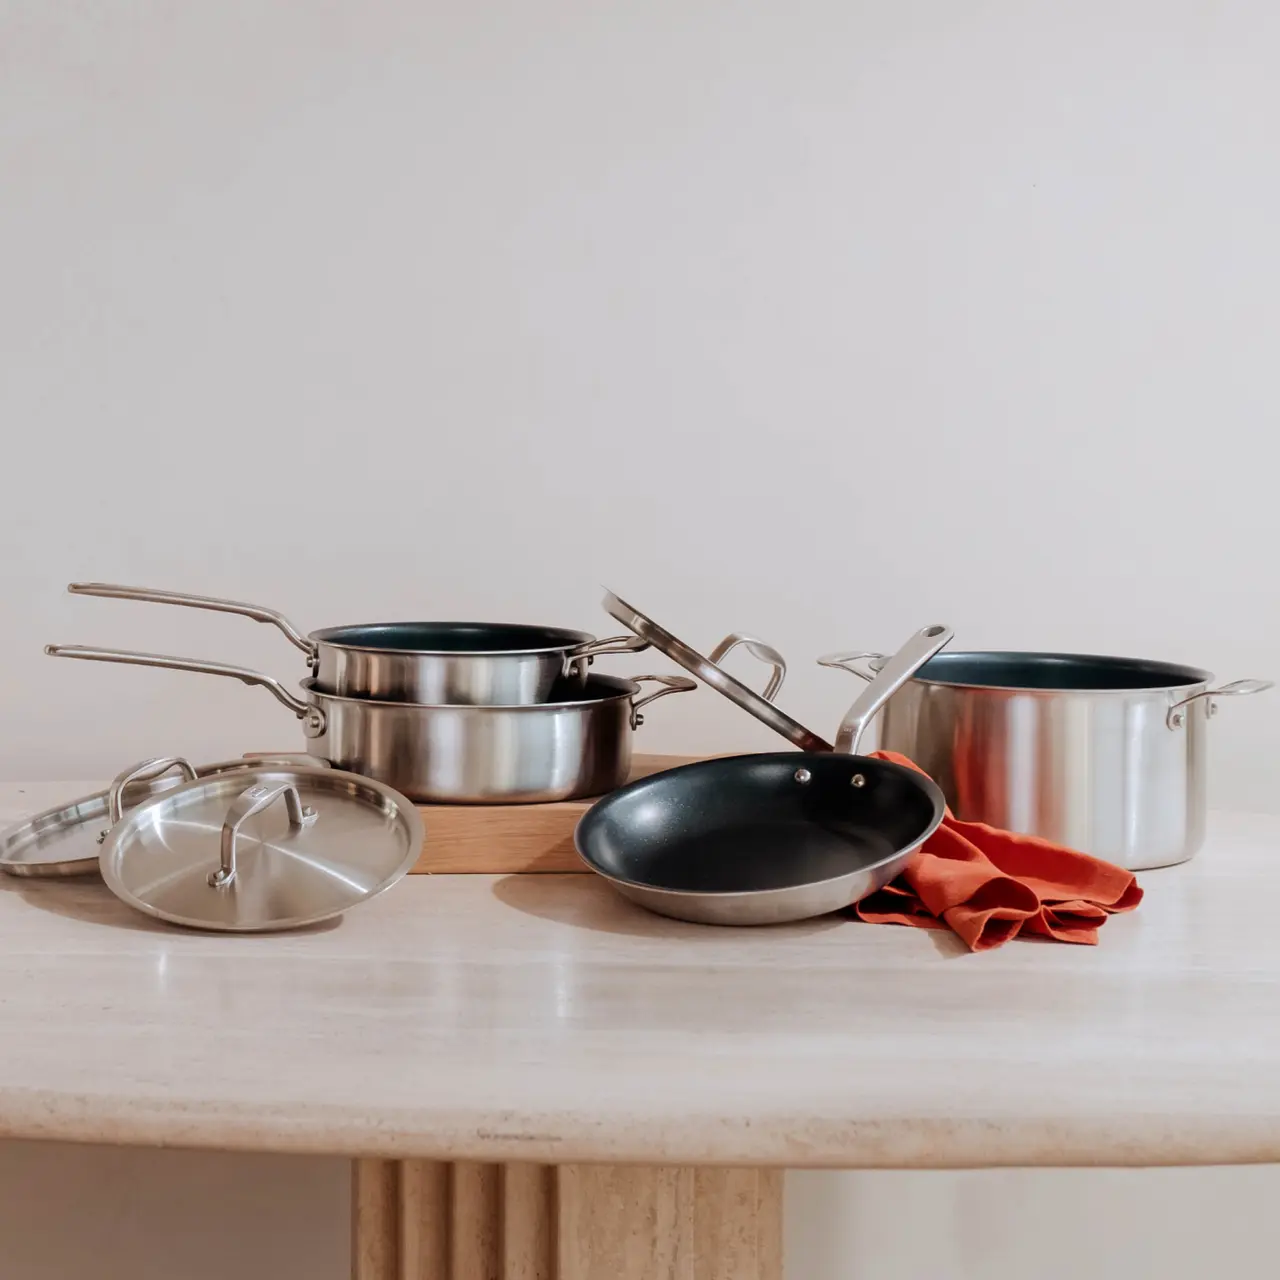 A set of stainless steel cookware including pots, a pan, and lids arranged neatly on a wooden table with a plain background.